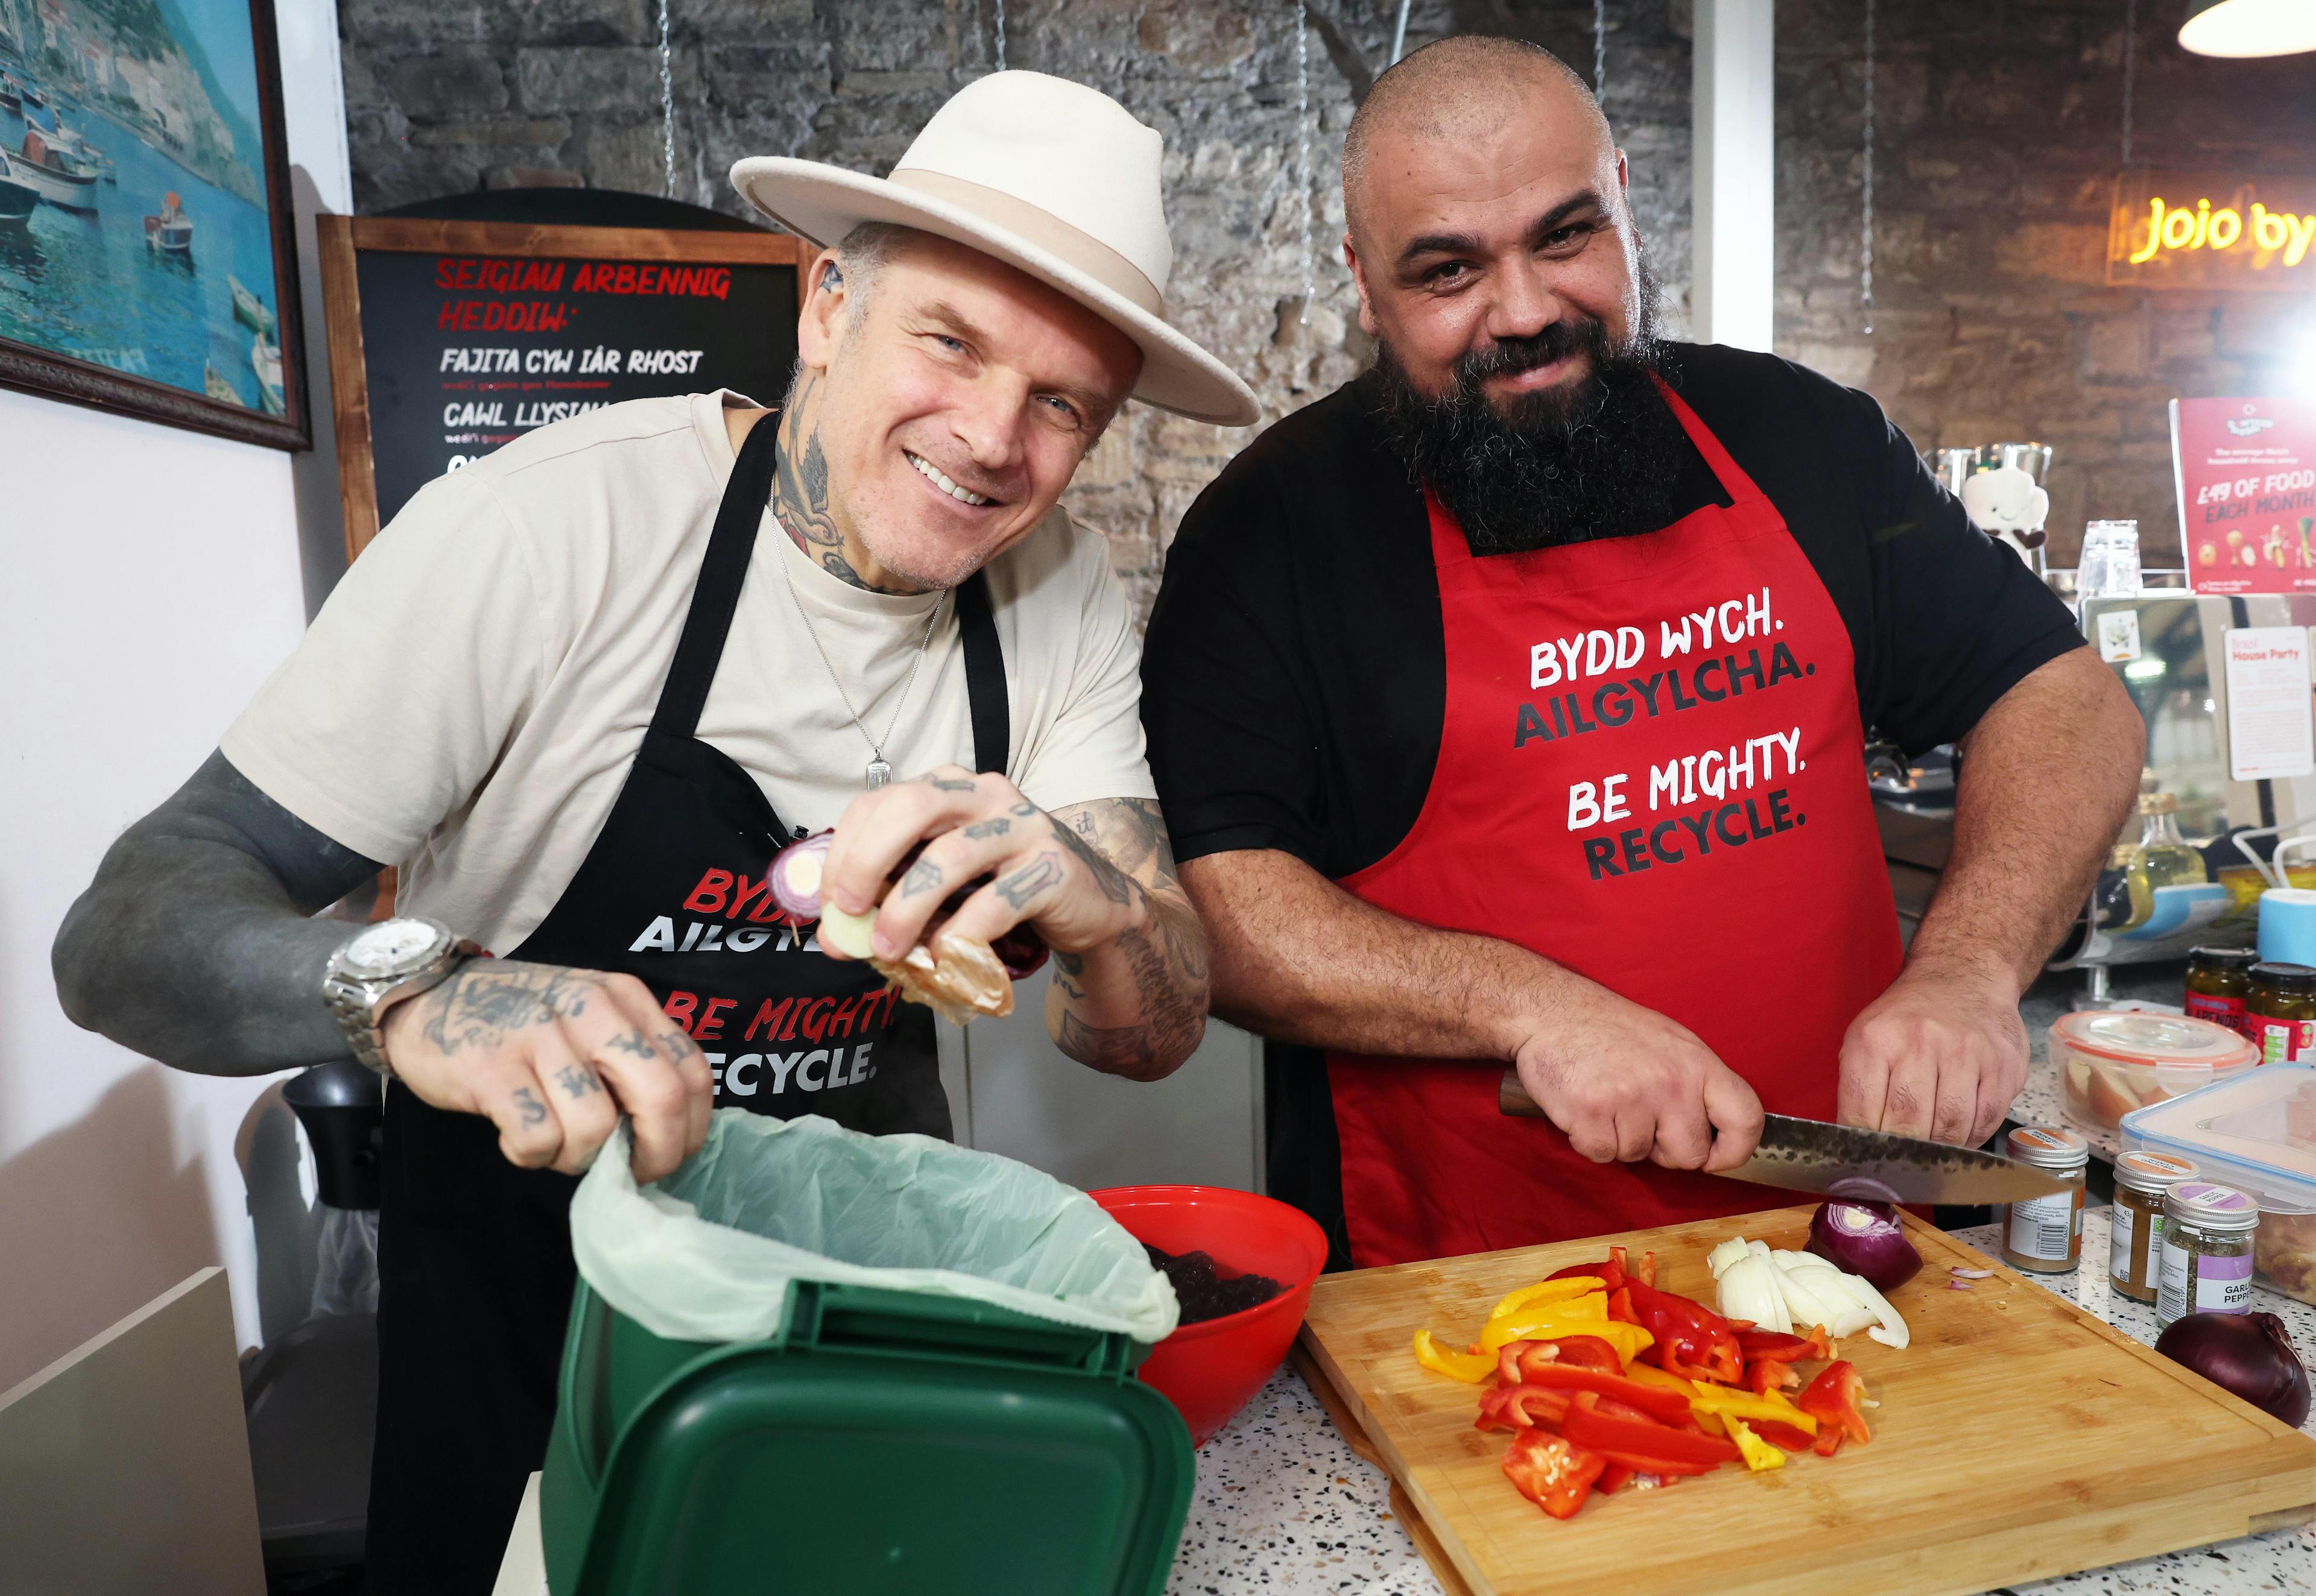 Two chefs in Cardiff Market, one holding a food waste caddy and one chopping vegetables on a wooden chopping board